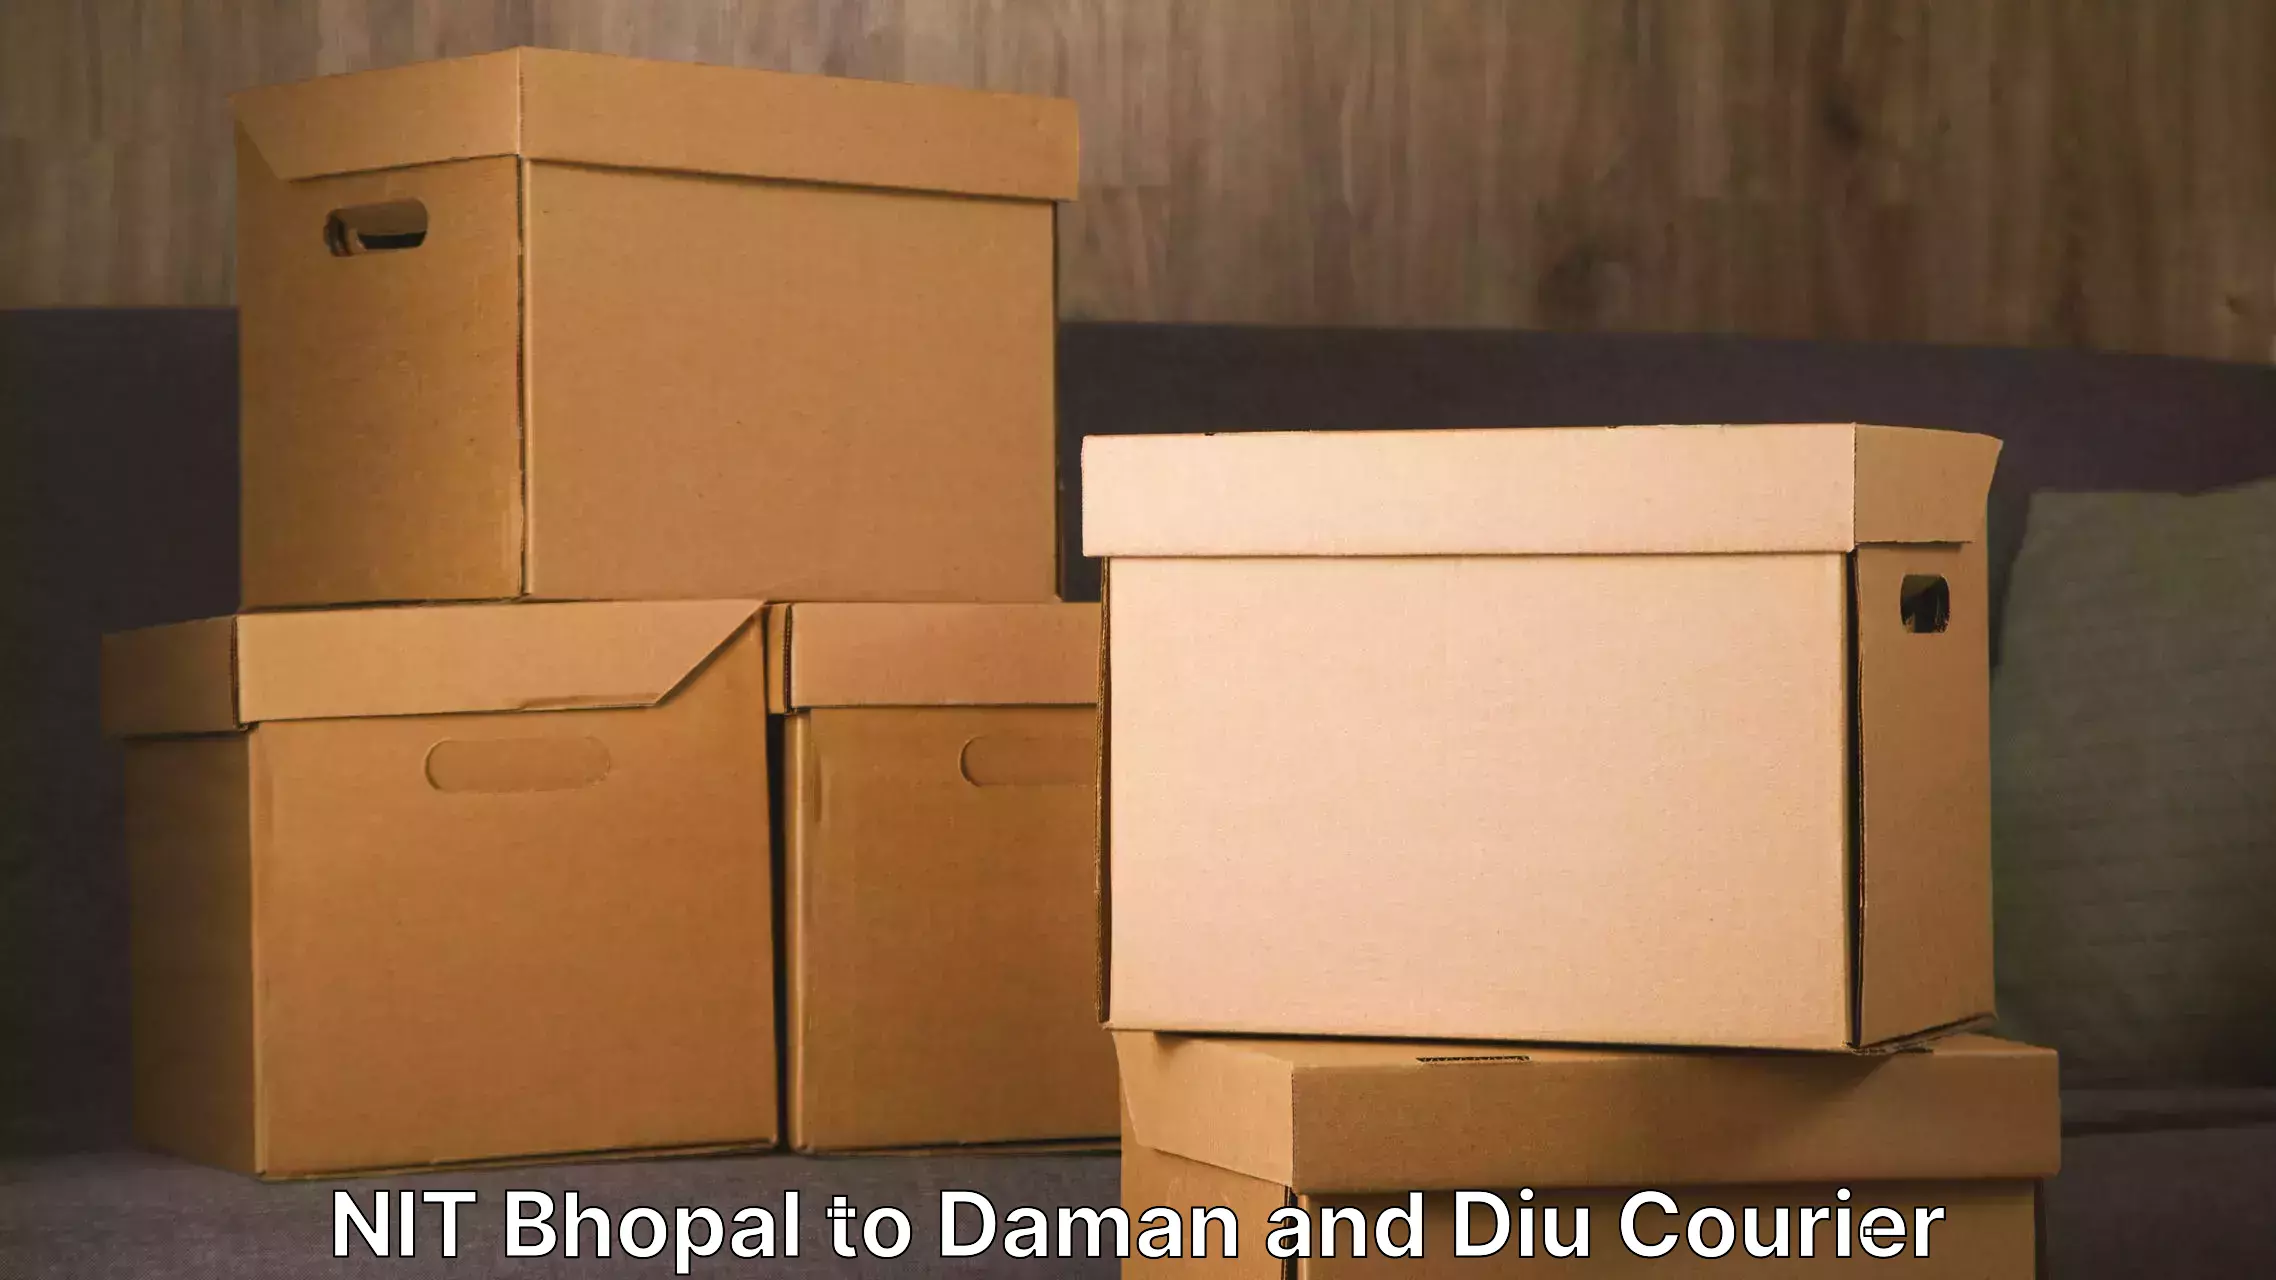 Furniture relocation experts NIT Bhopal to Daman